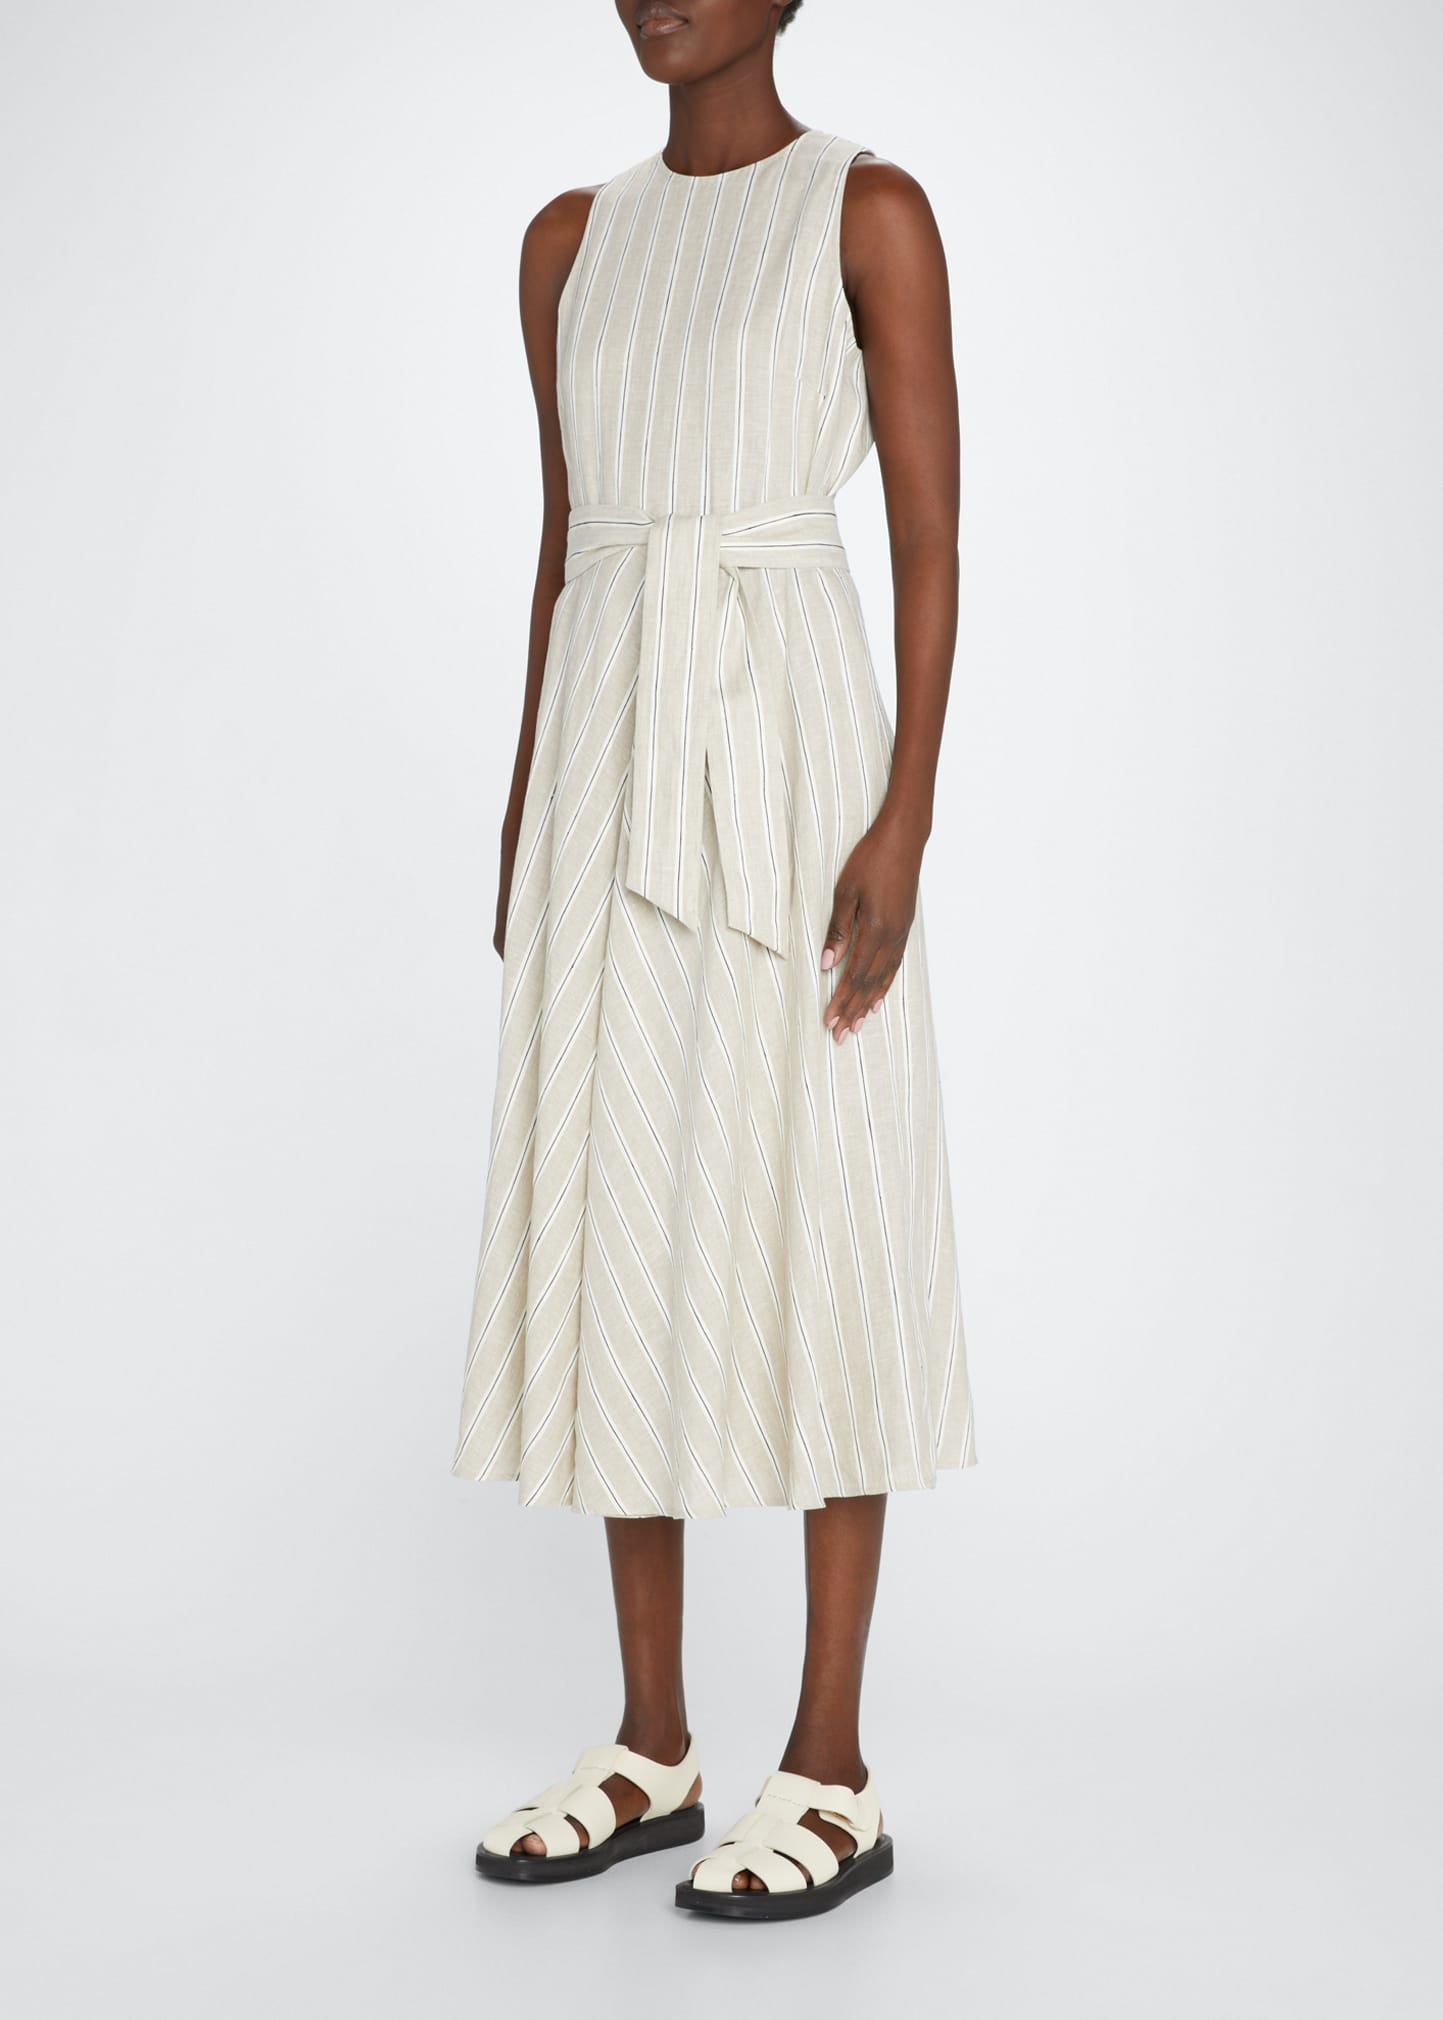 Milly for Bergdorf Goodman White Collared White Top Black Bottom Dress –  The Hangout